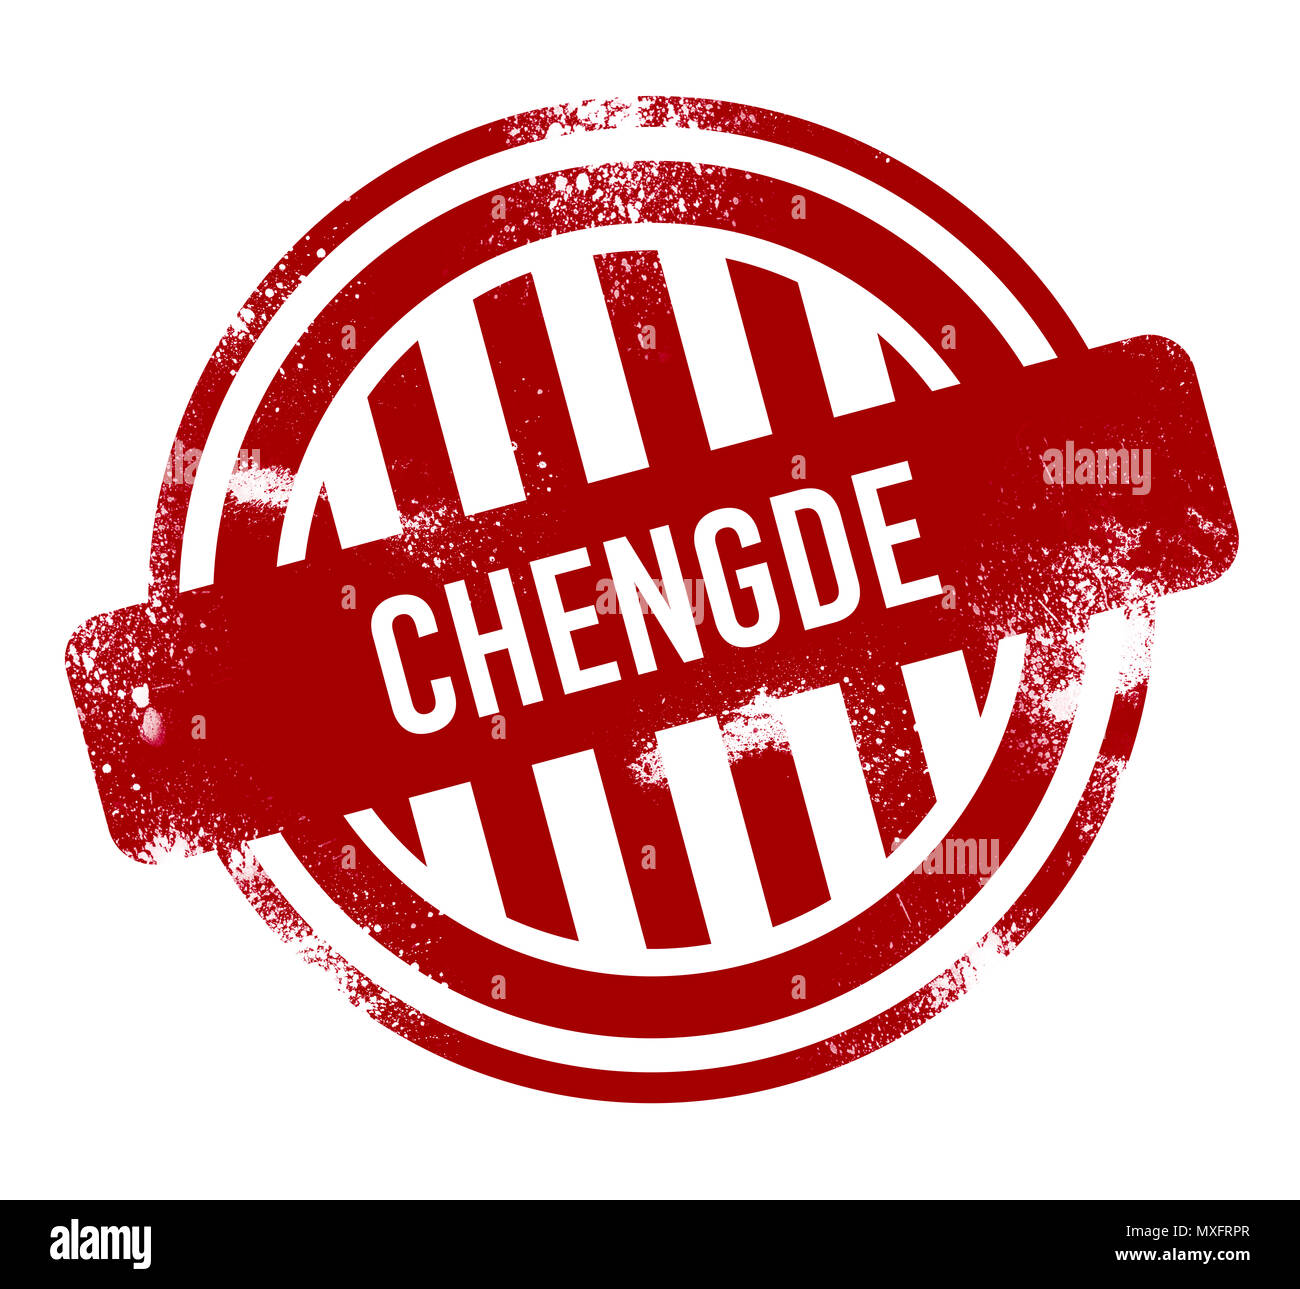 Chengde - Red grunge button, stamp Stock Photo